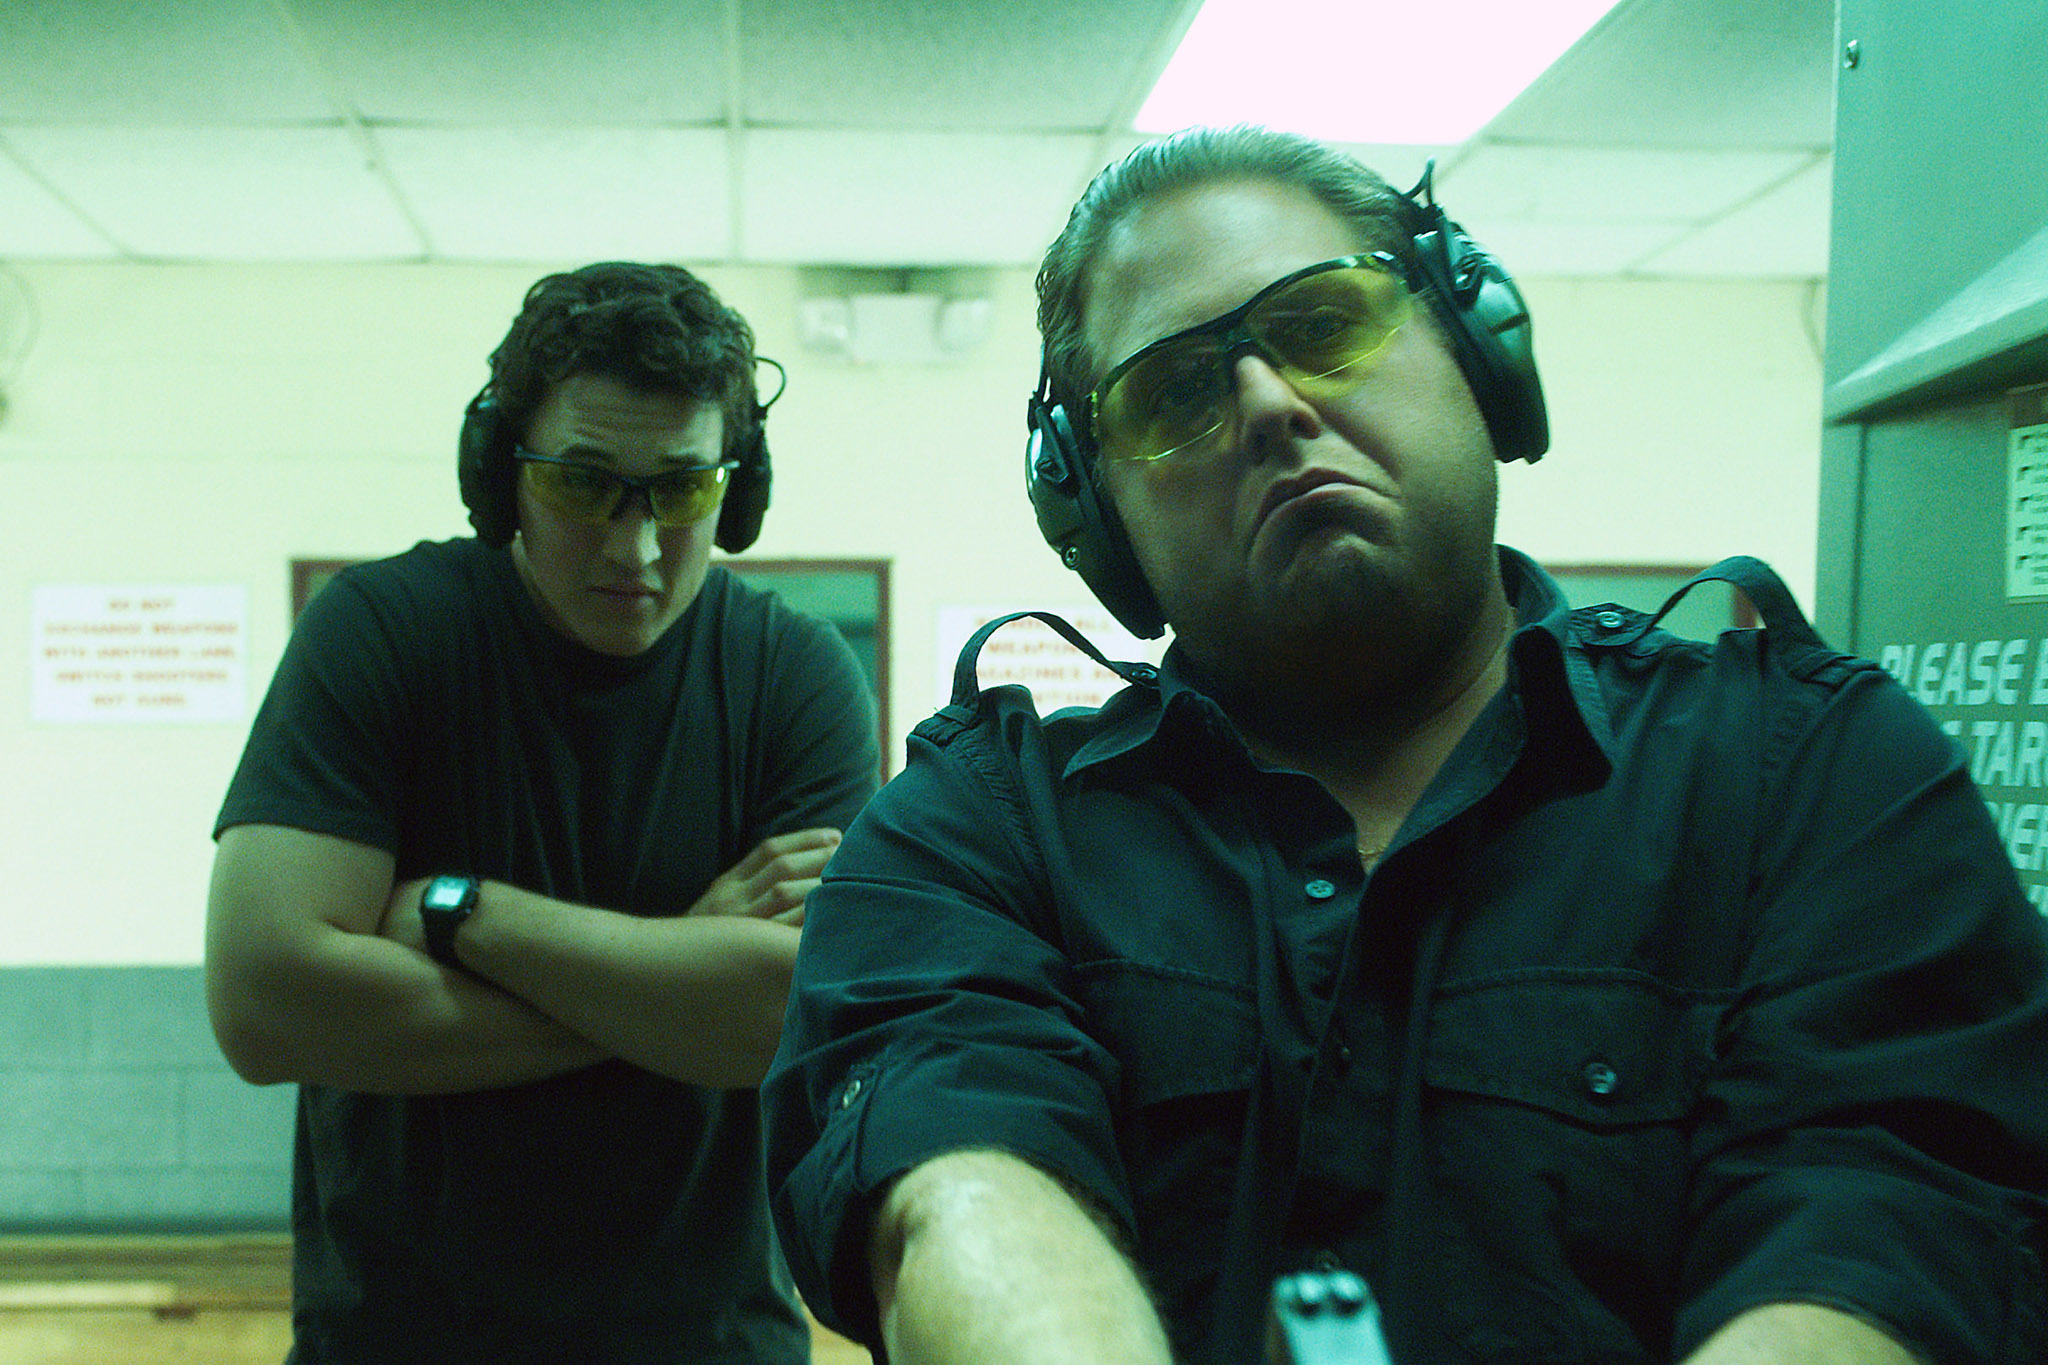 Best Jonah Hill movies from comedies to dramas